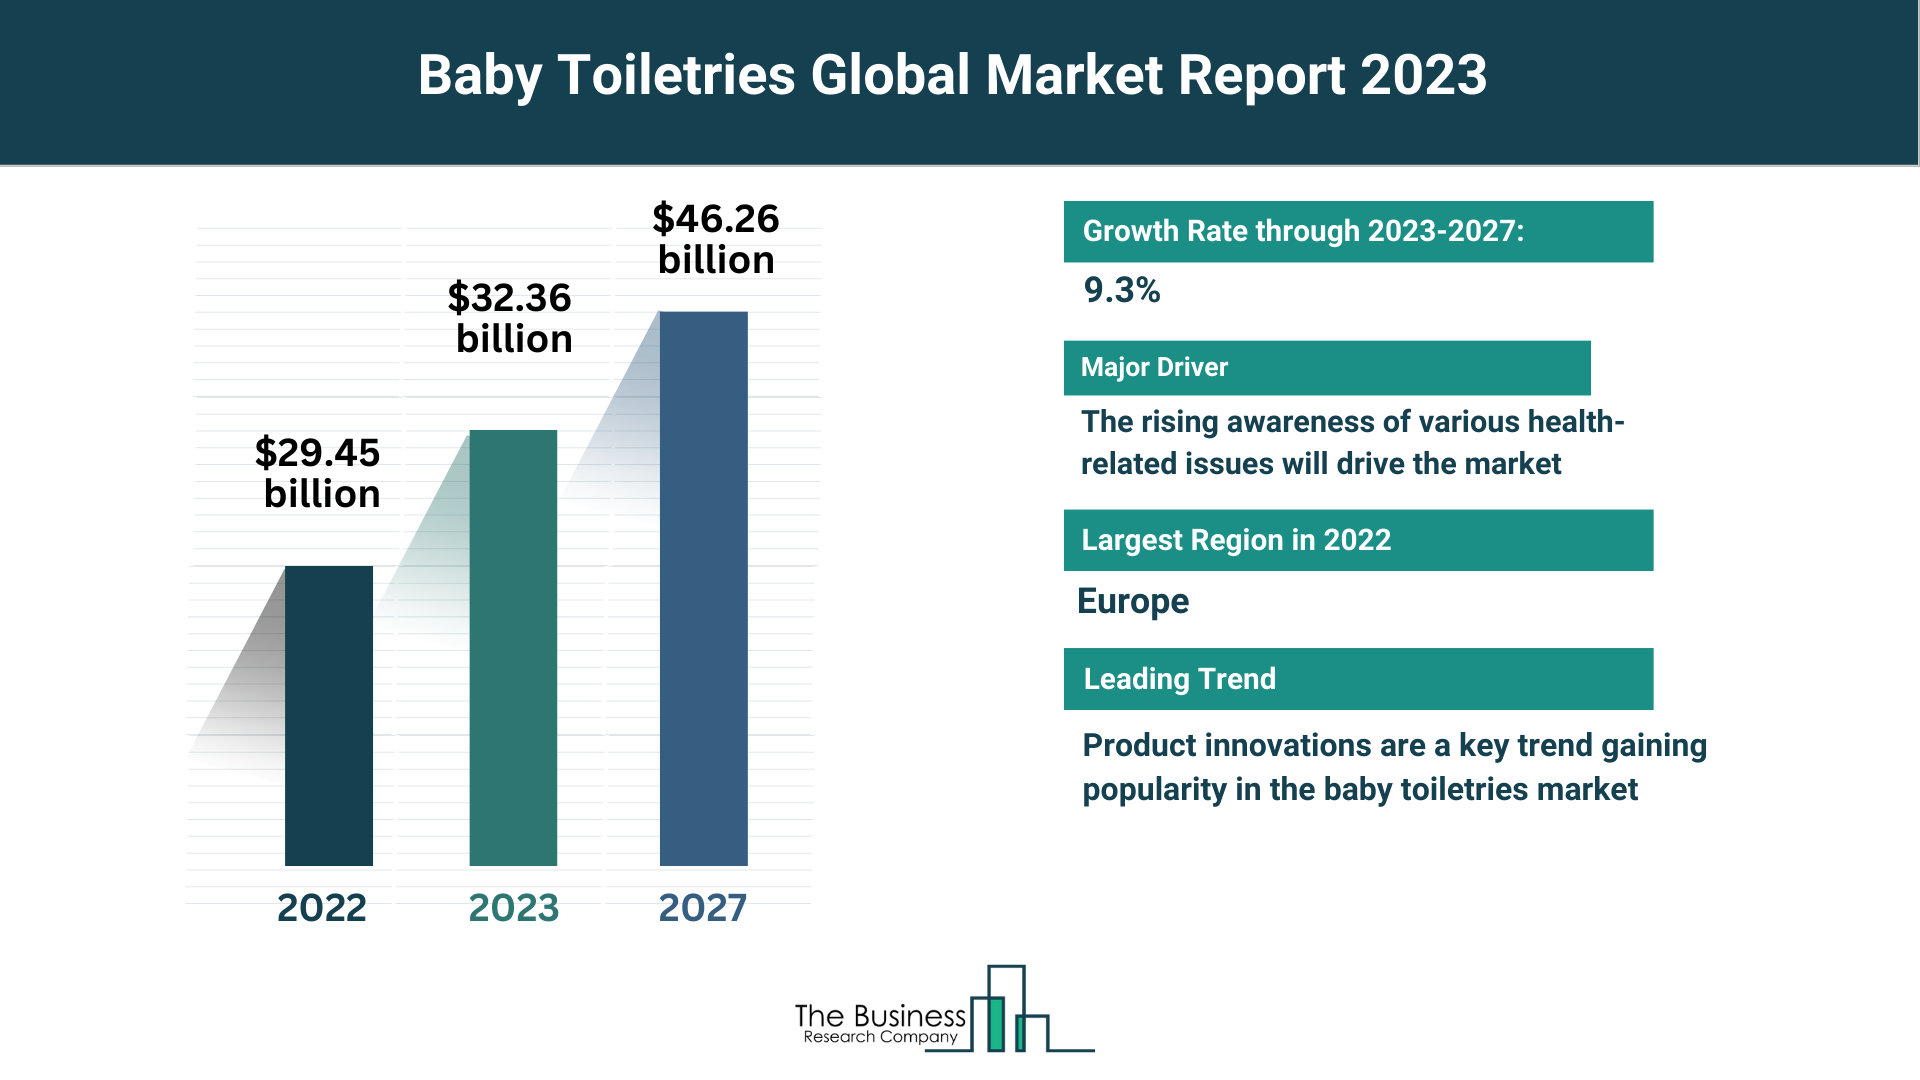 Global Baby Toiletries Market Analysis: Size, Drivers, Trends, Opportunities And Strategies